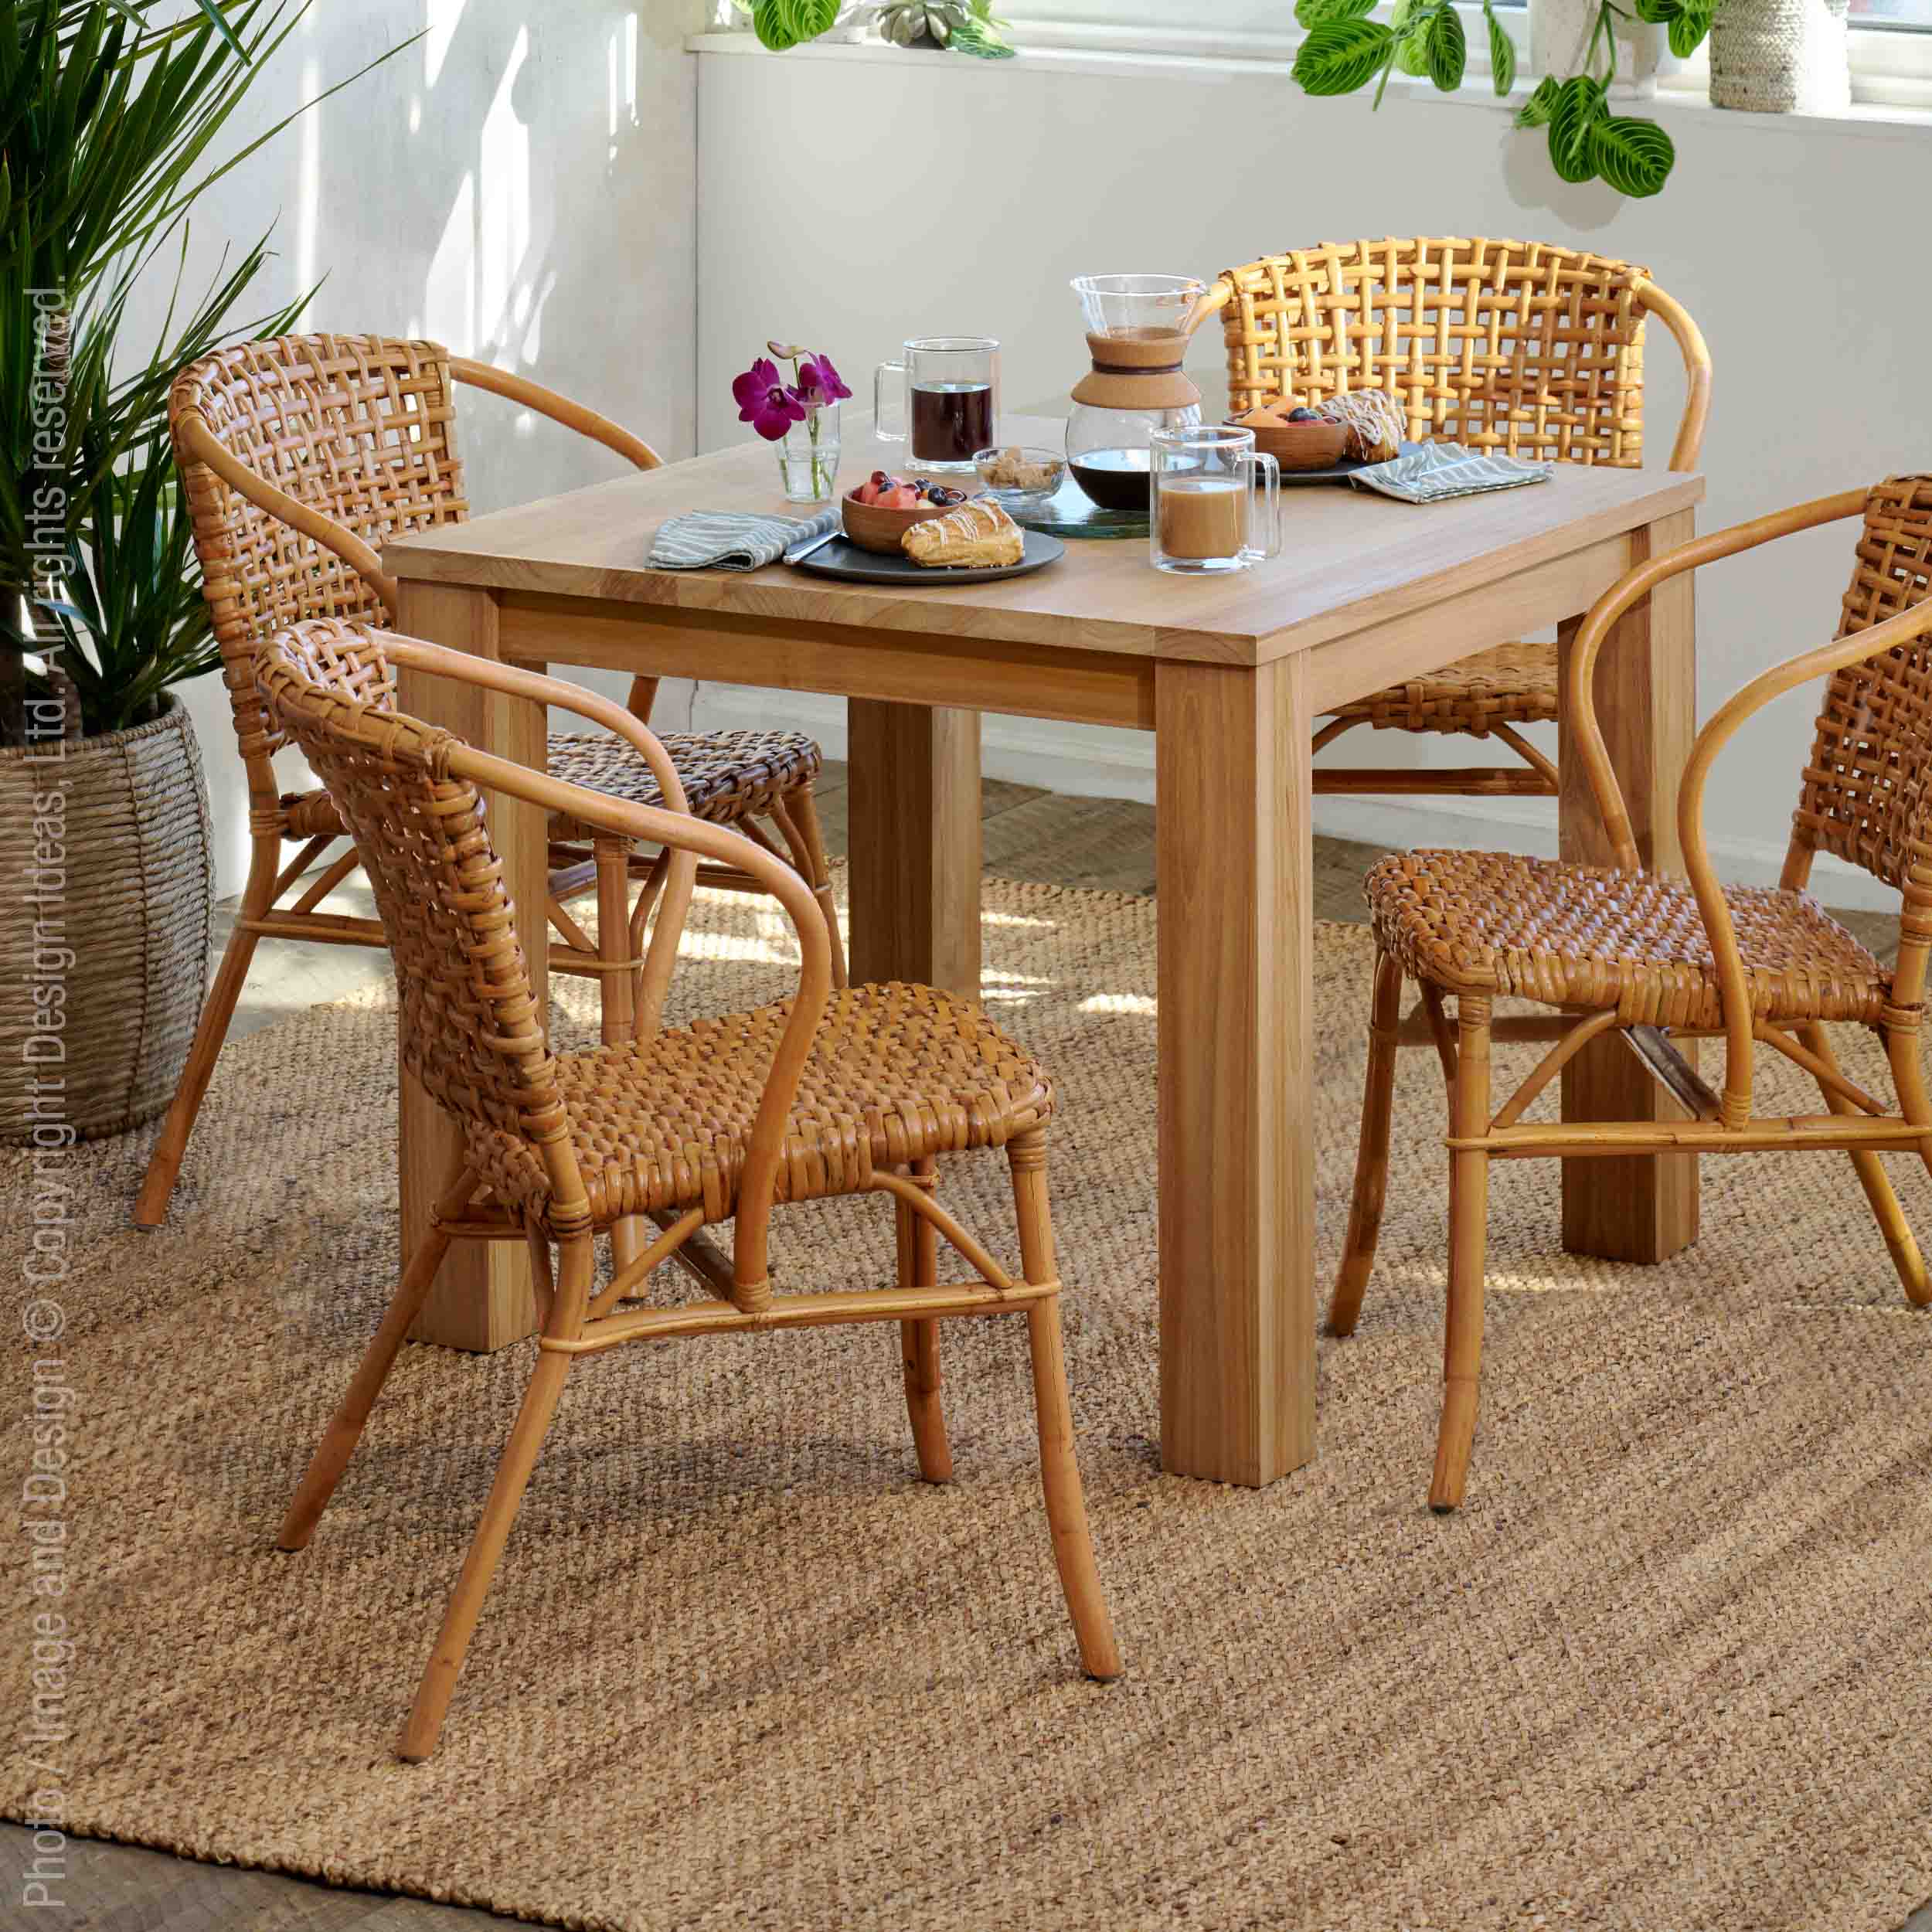 Takara™ Teak Square Dining Table | Image 1 | From the Takara Collection | Skillfully constructed with natural teak for long lasting use | Available in natural color | texxture home